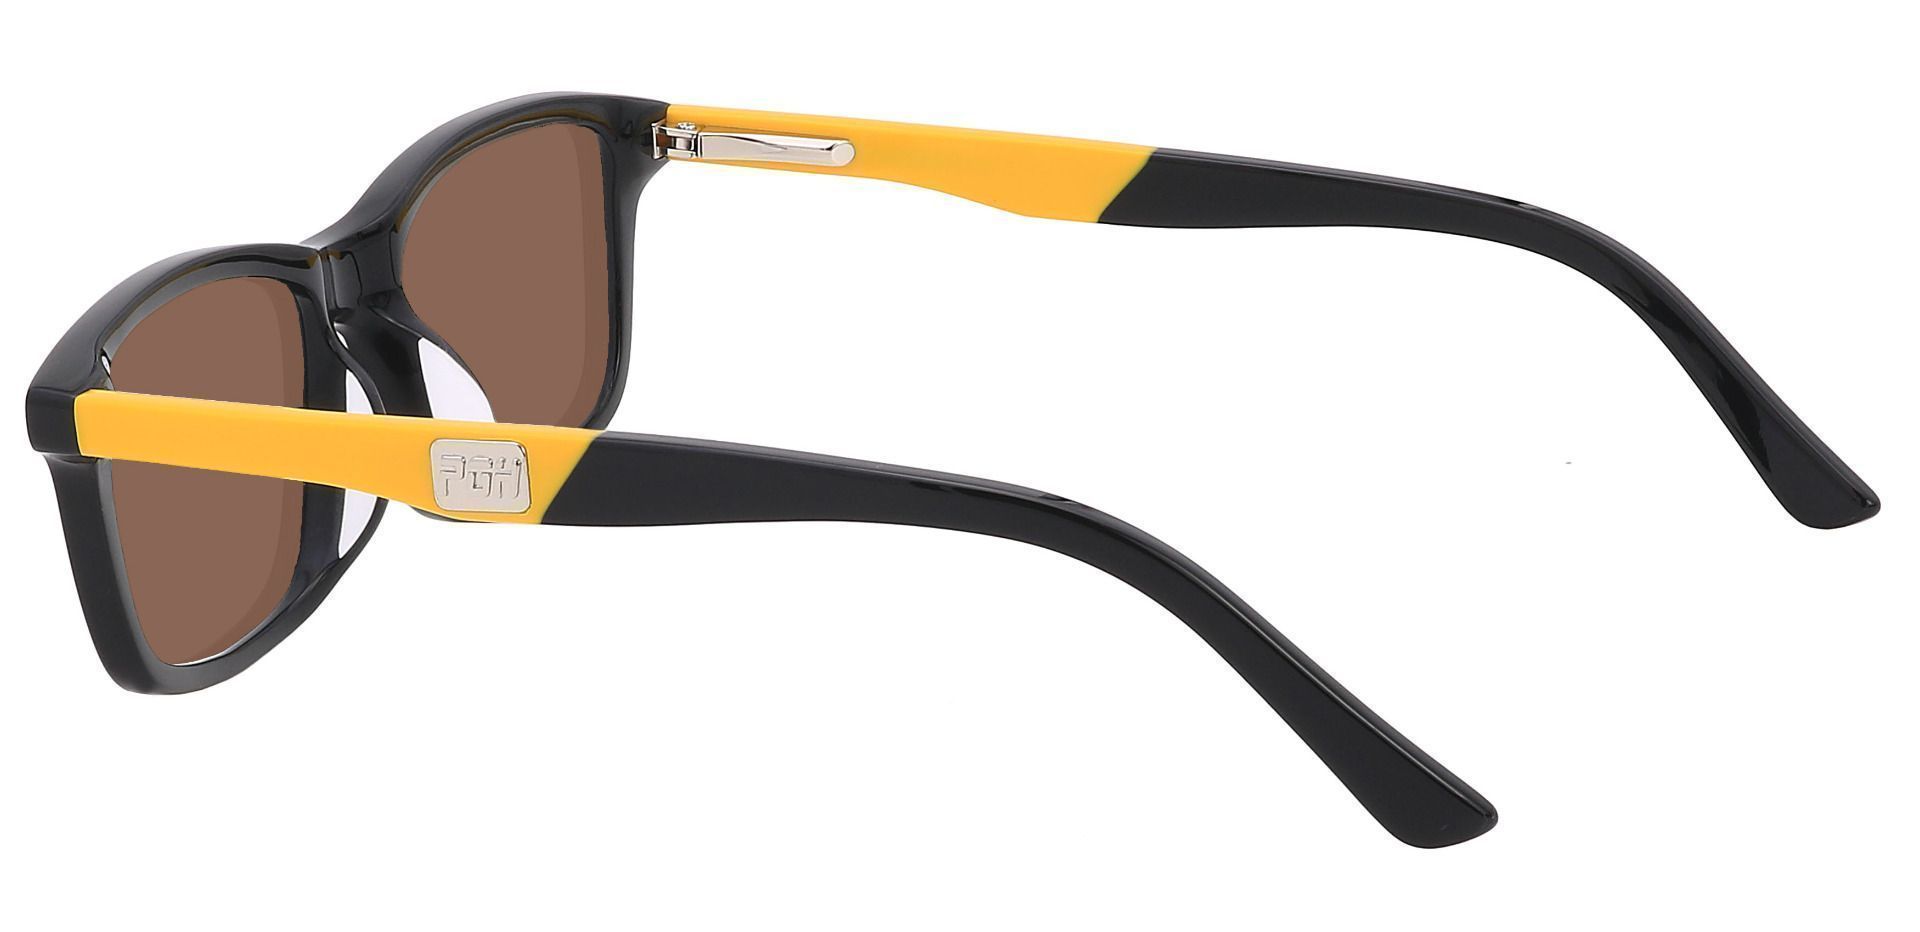 Allegheny Rectangle Single Vision Sunglasses - Black Frame With Brown Lenses